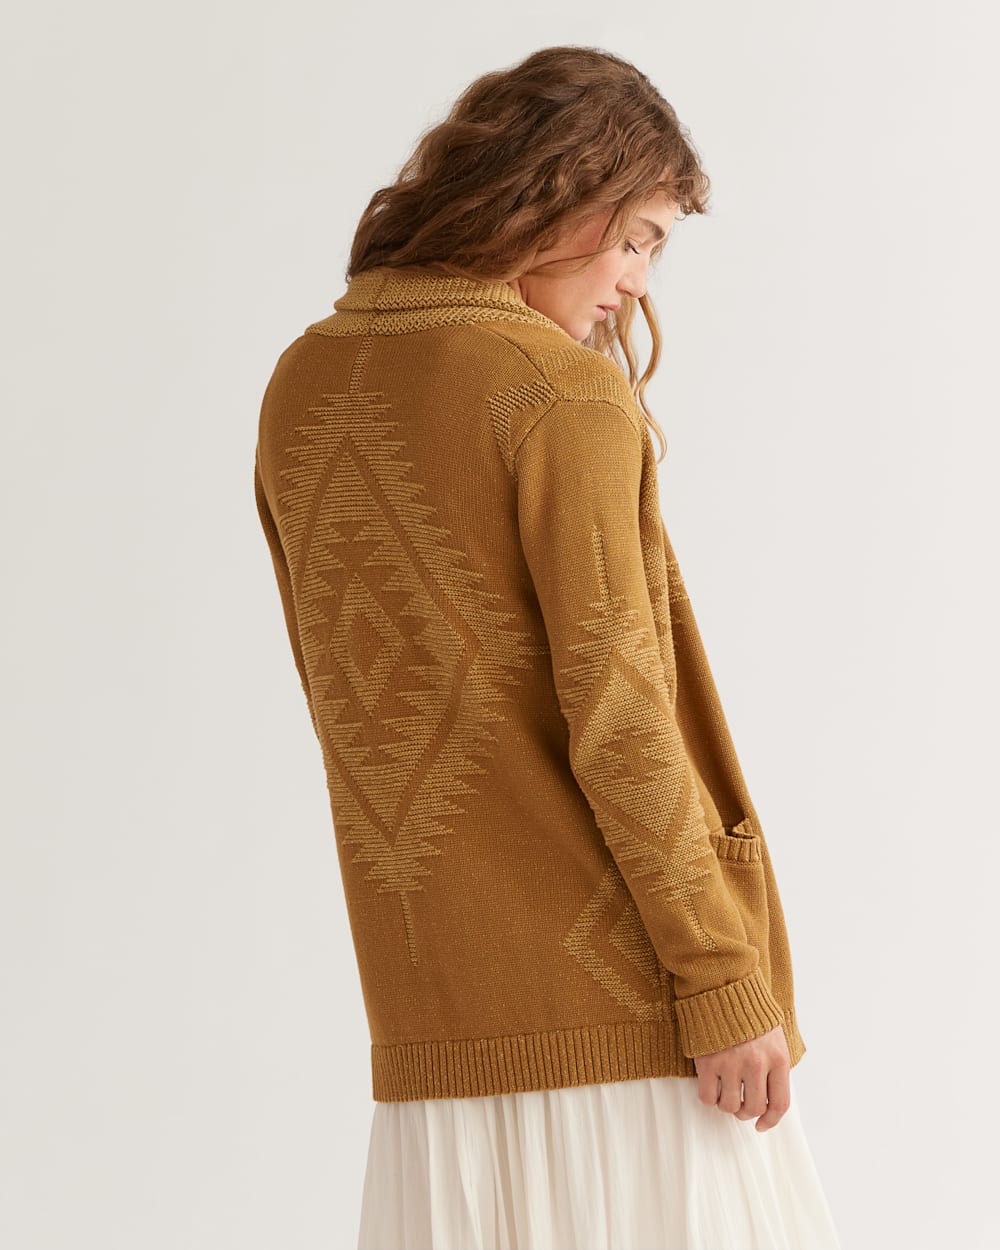 ALTERNATE VIEW OF WOMEN'S HERITAGE COTTON CARDIGAN IN BRONZE/CURRY image number 4